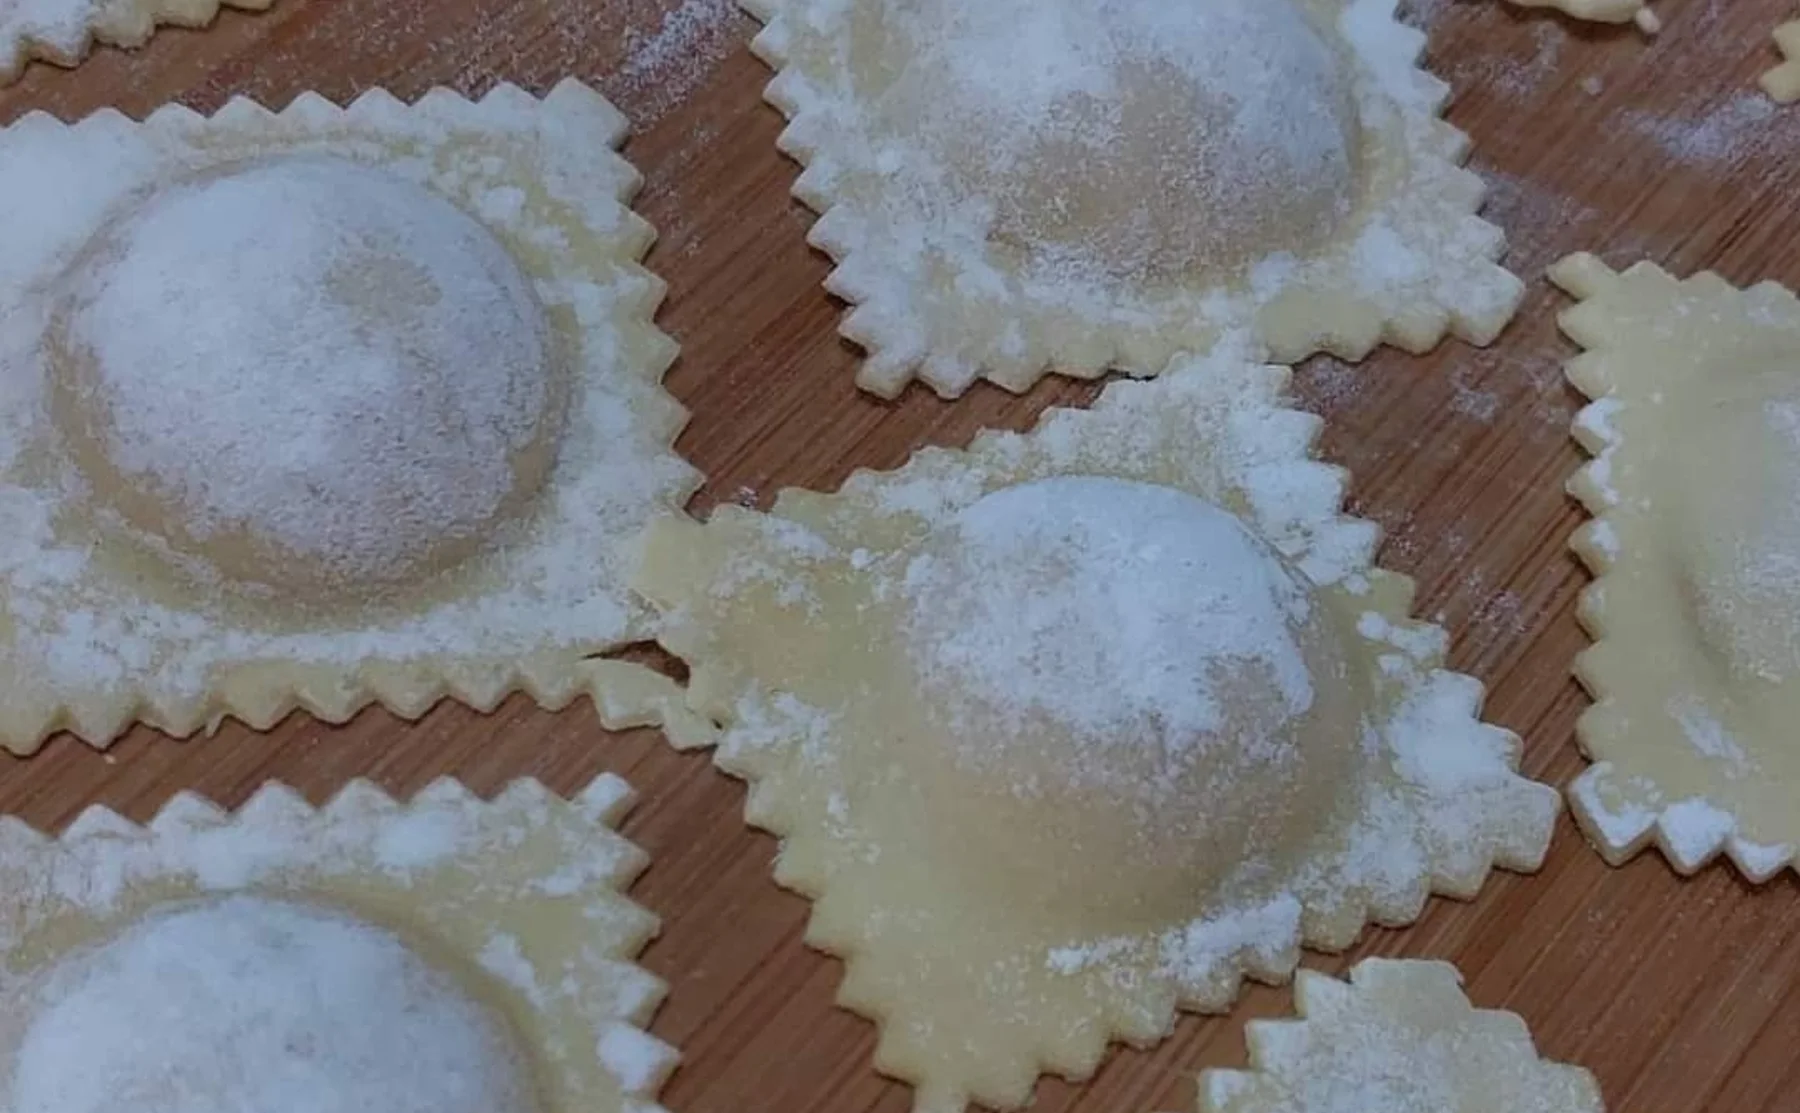  Fettuccine and ravioli cooking class complete with aperitif and lunch - 1481752